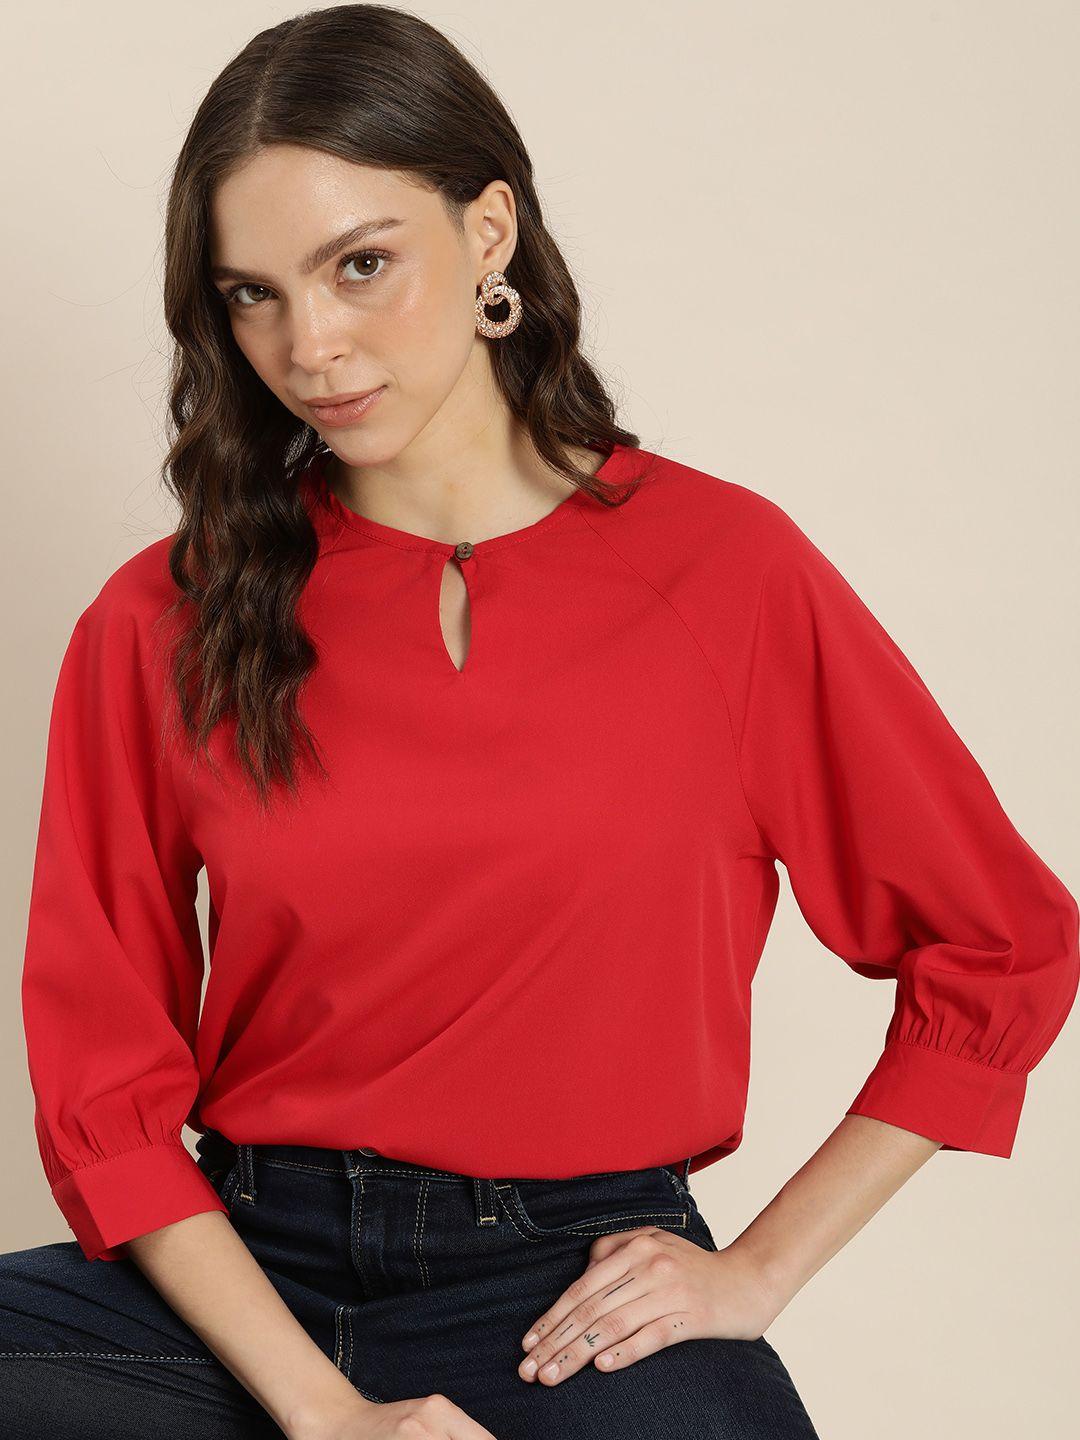 encore by invictus women red top